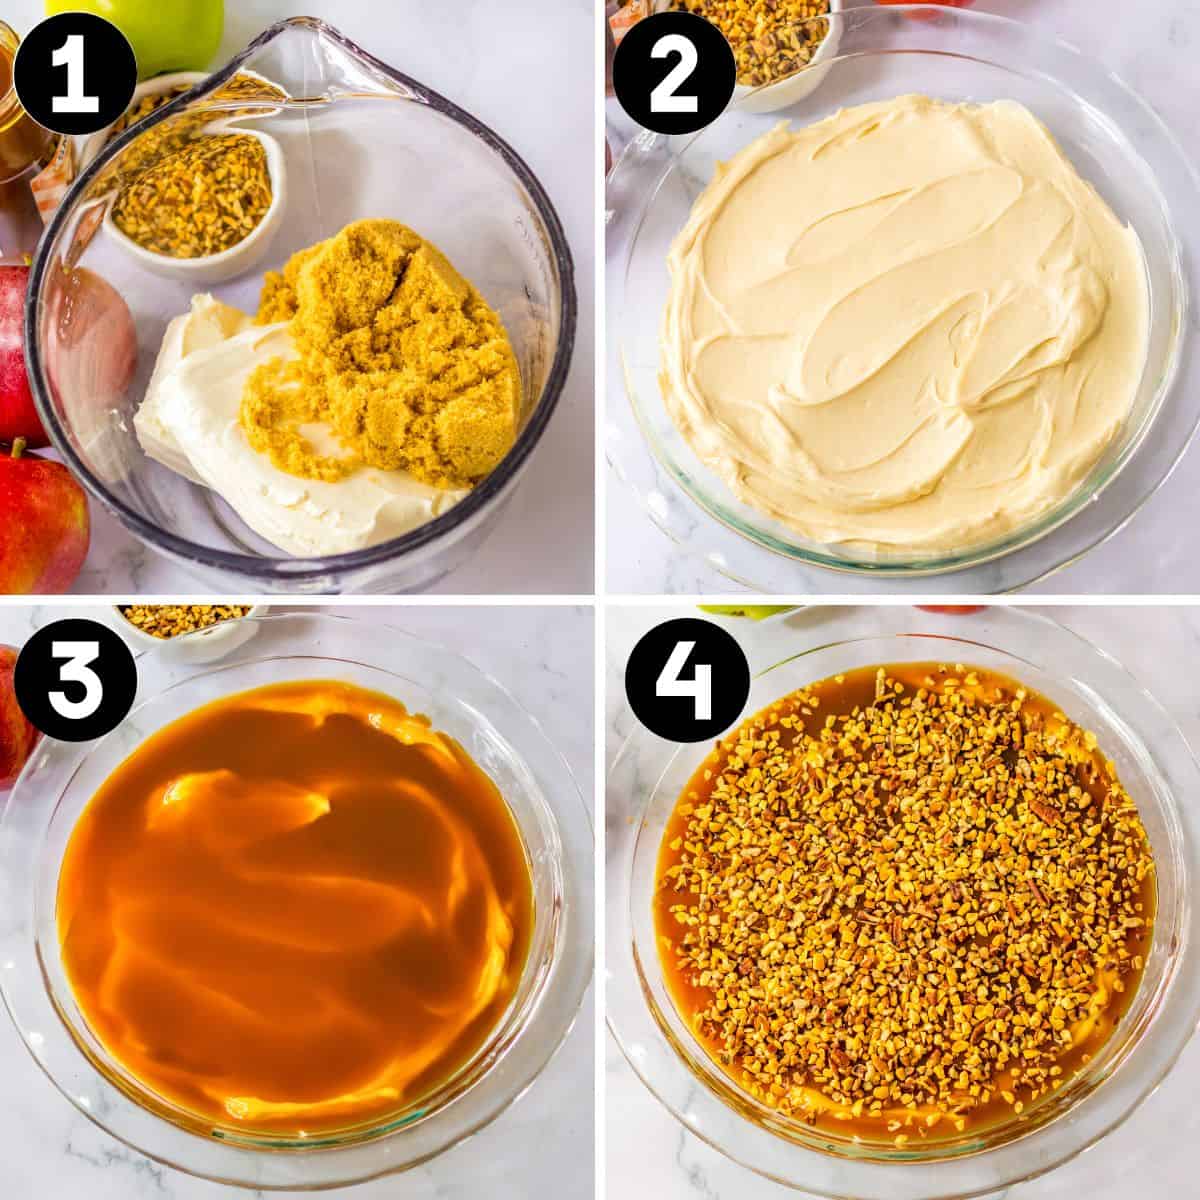 Four image collage of cream cheese and brown sugar in mixing bowl, the cream cheese mixture spread in a dish, the mixture topped with a layer of caramel, and finally the caramel sprinkled with chopped nuts.